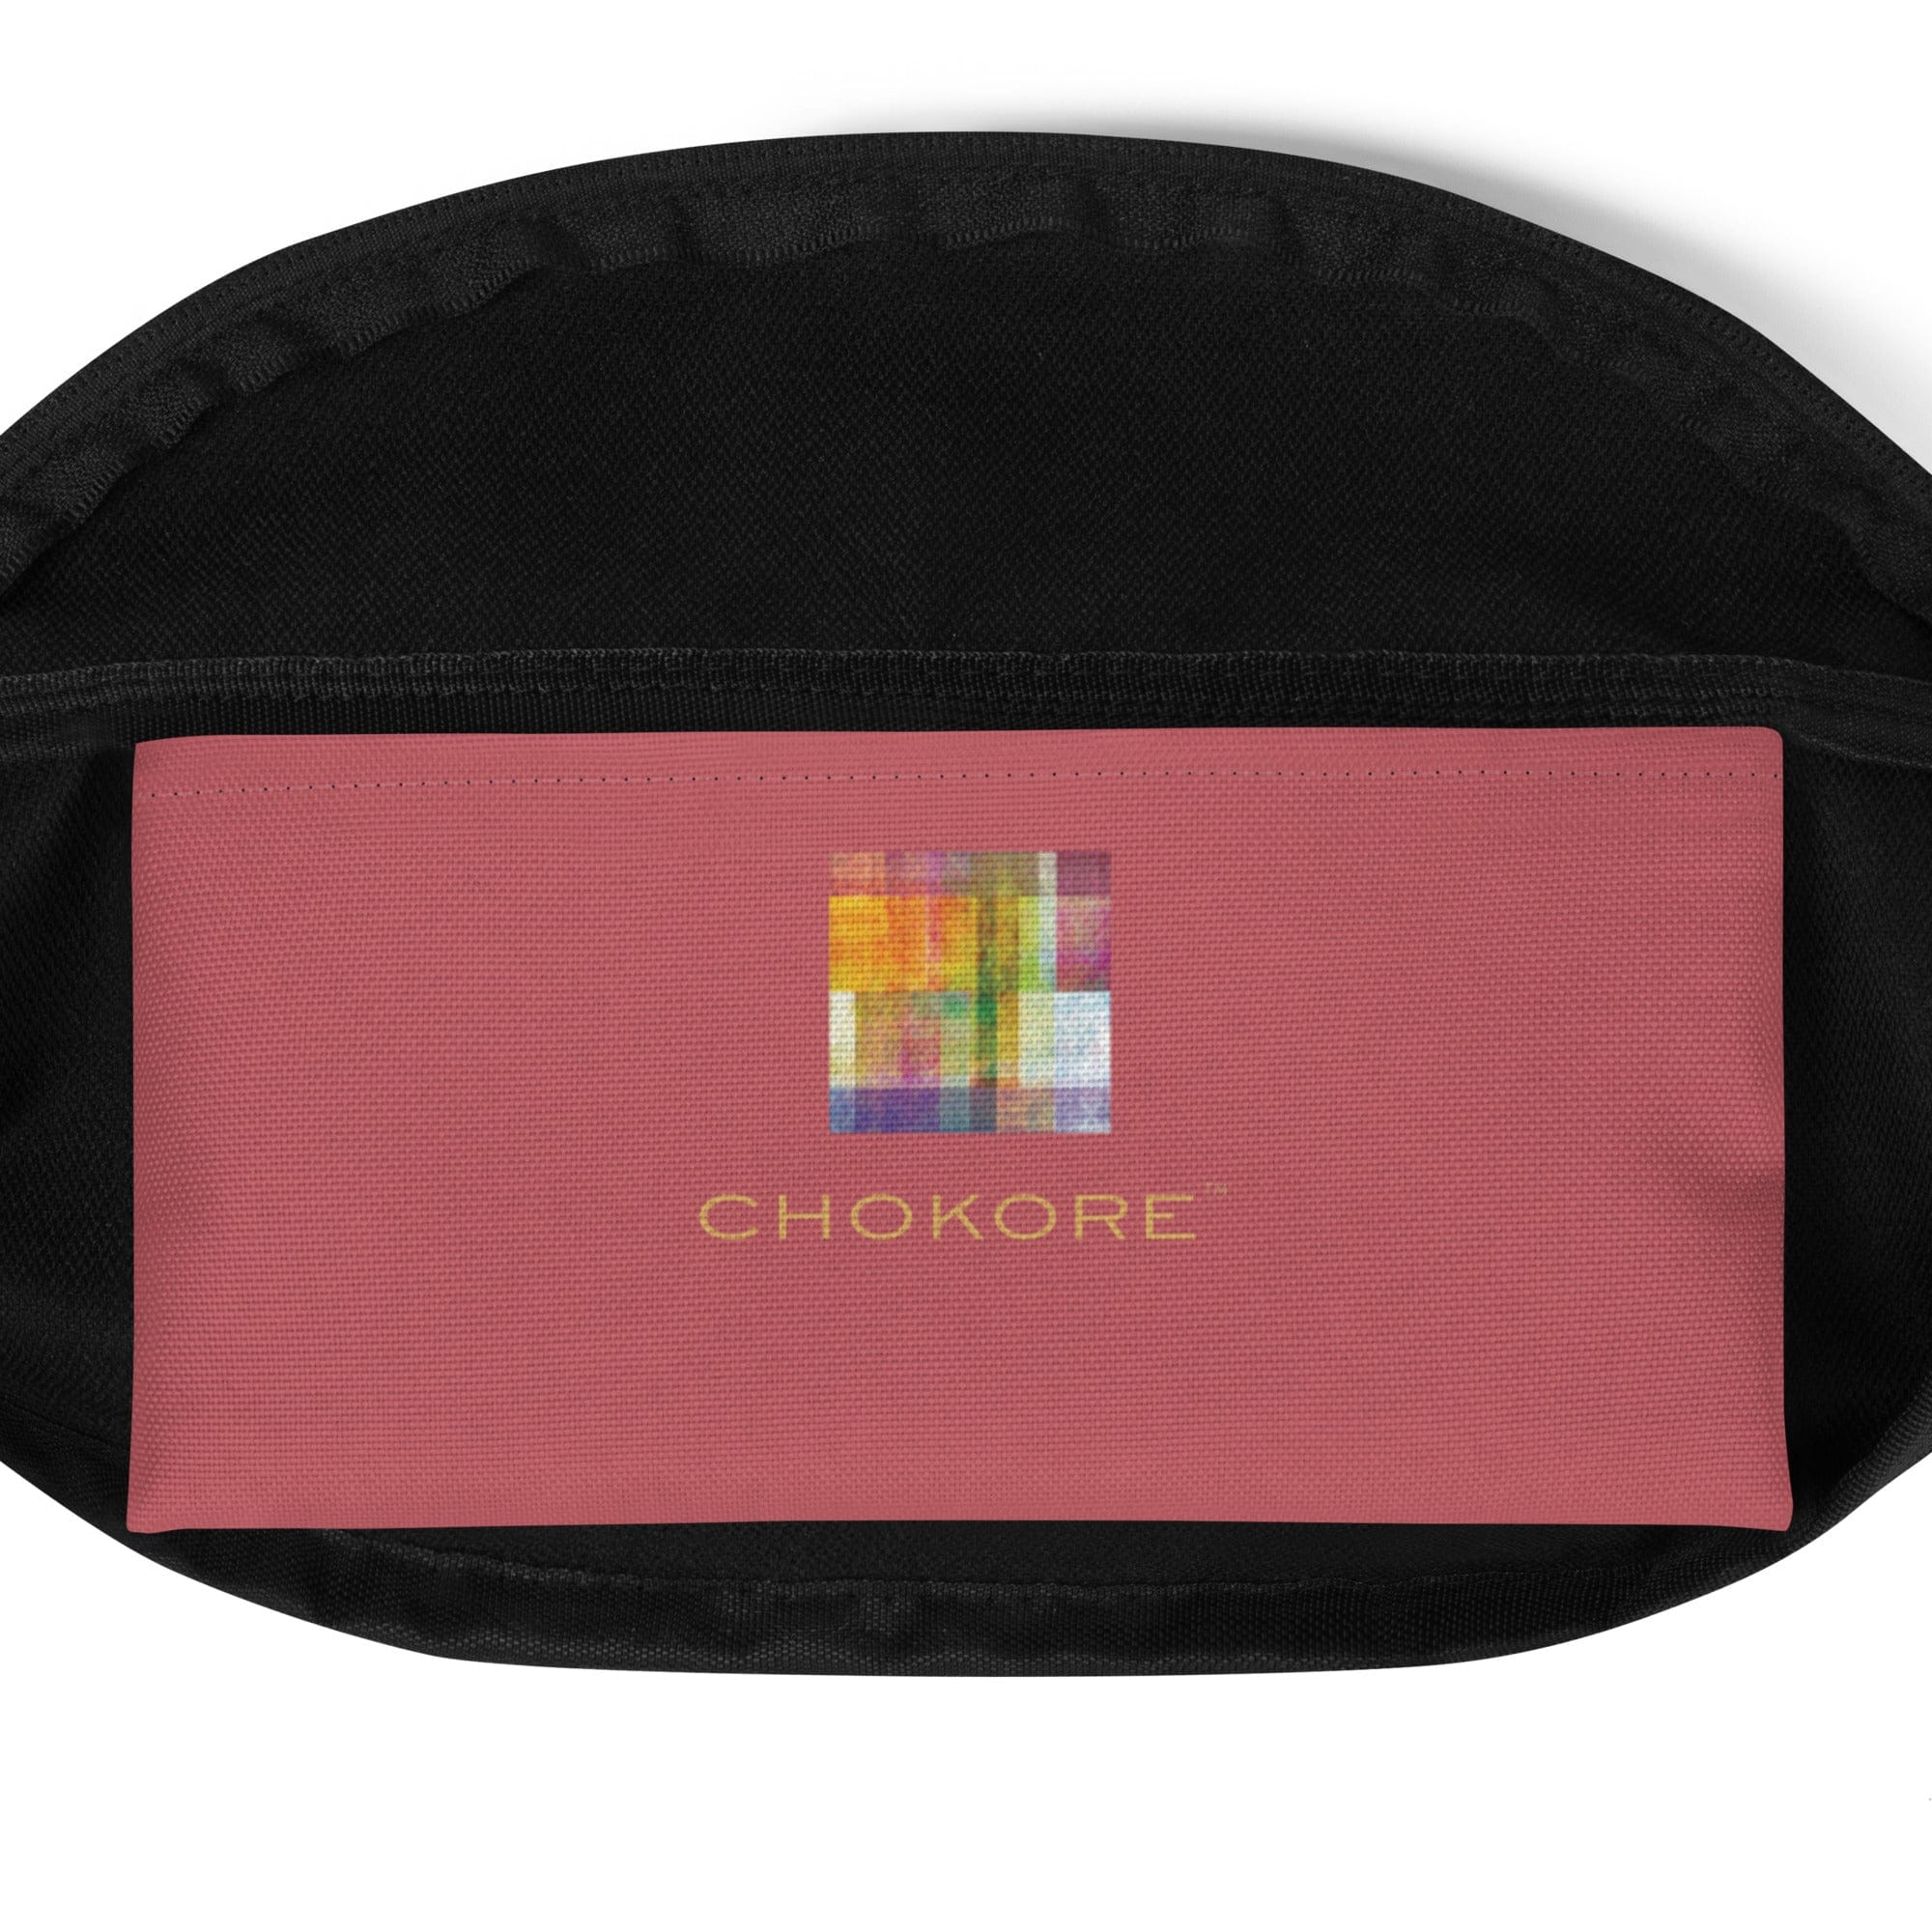 Chokore A Riot of Colors. From the Plaids collection.